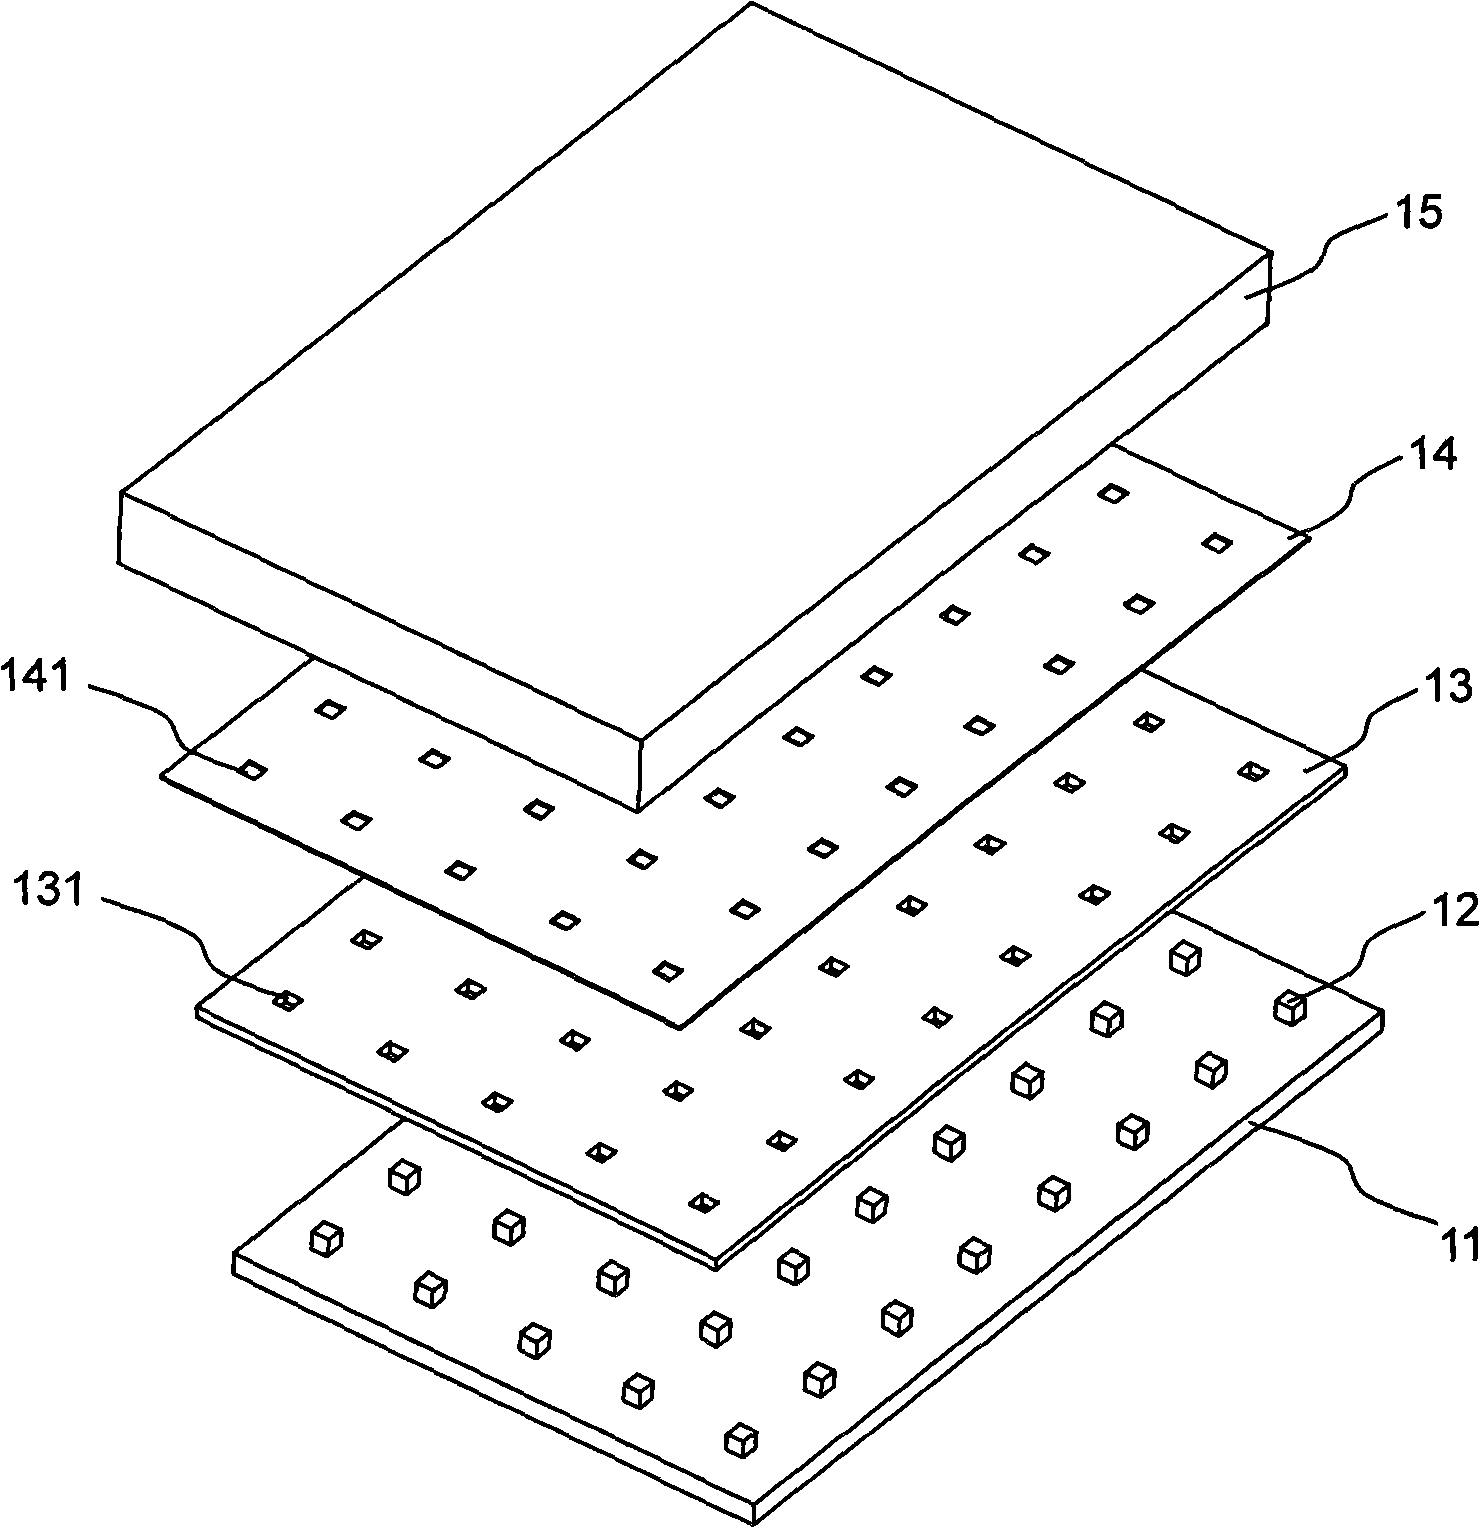 Directly-down backlight module unit